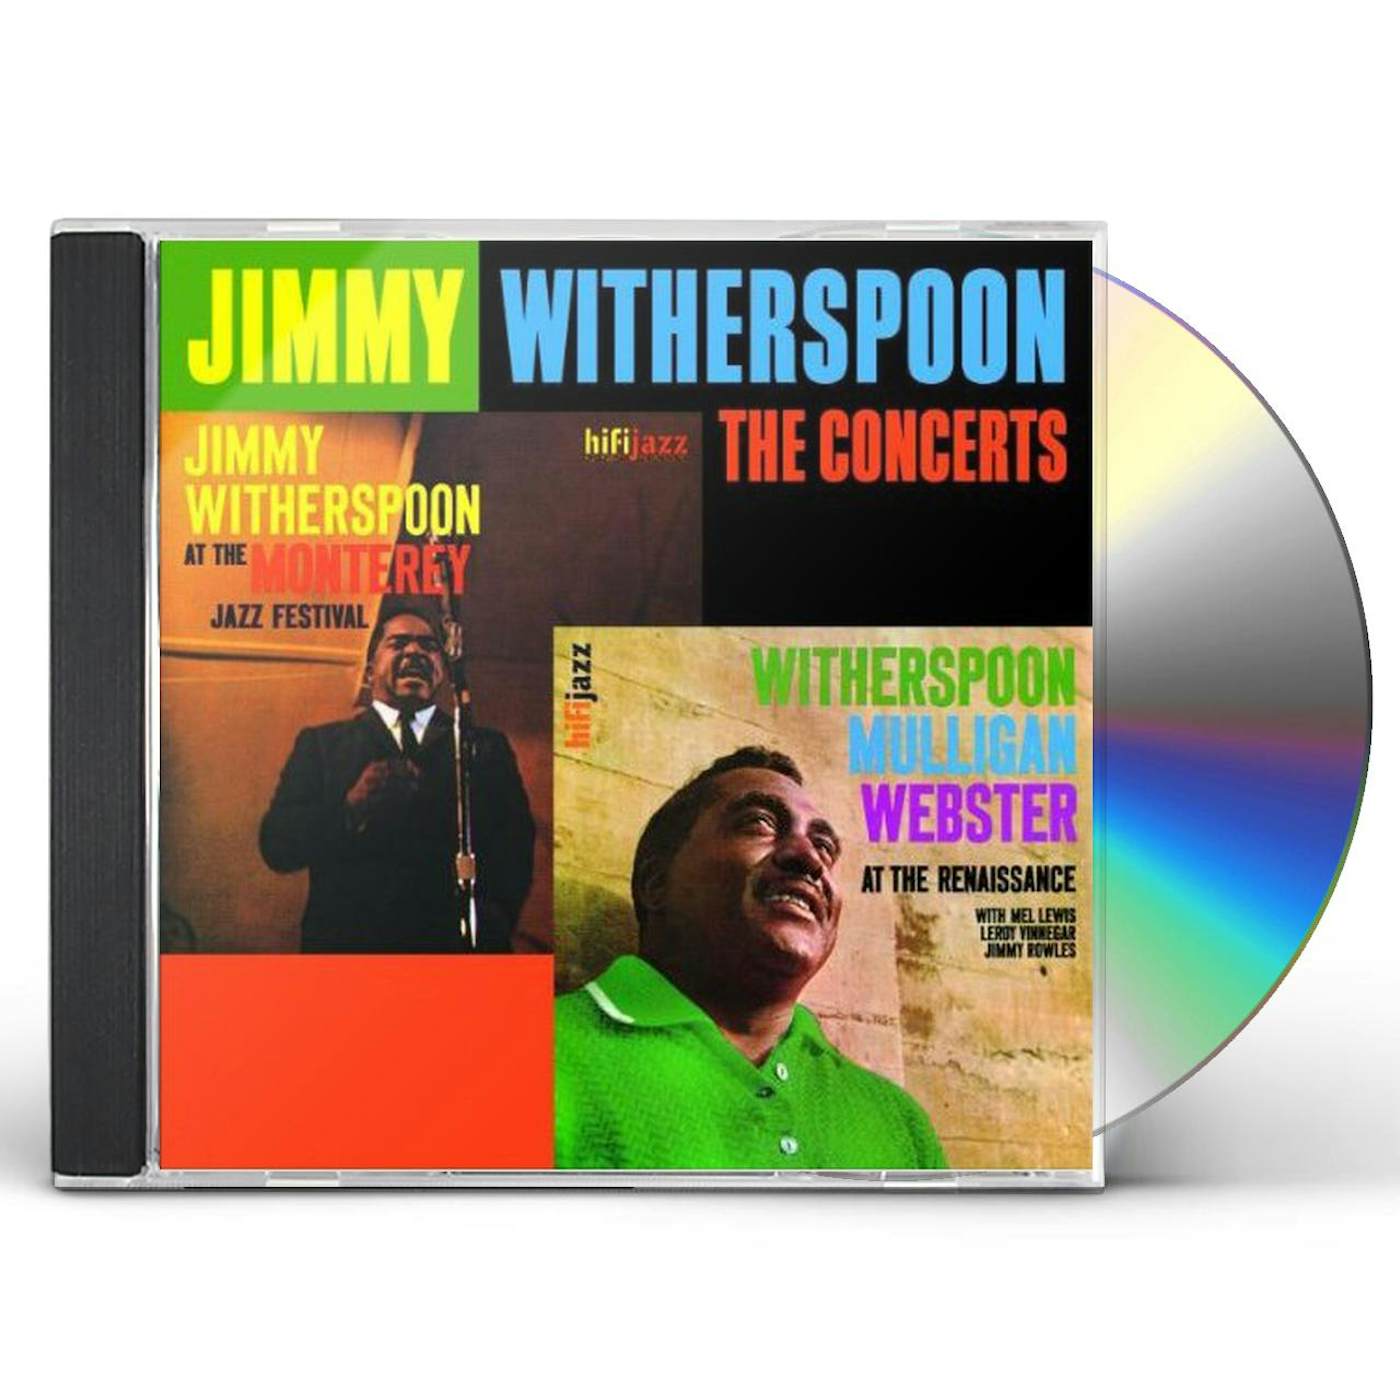 Jimmy Witherspoon SPOON CONCERTS CD